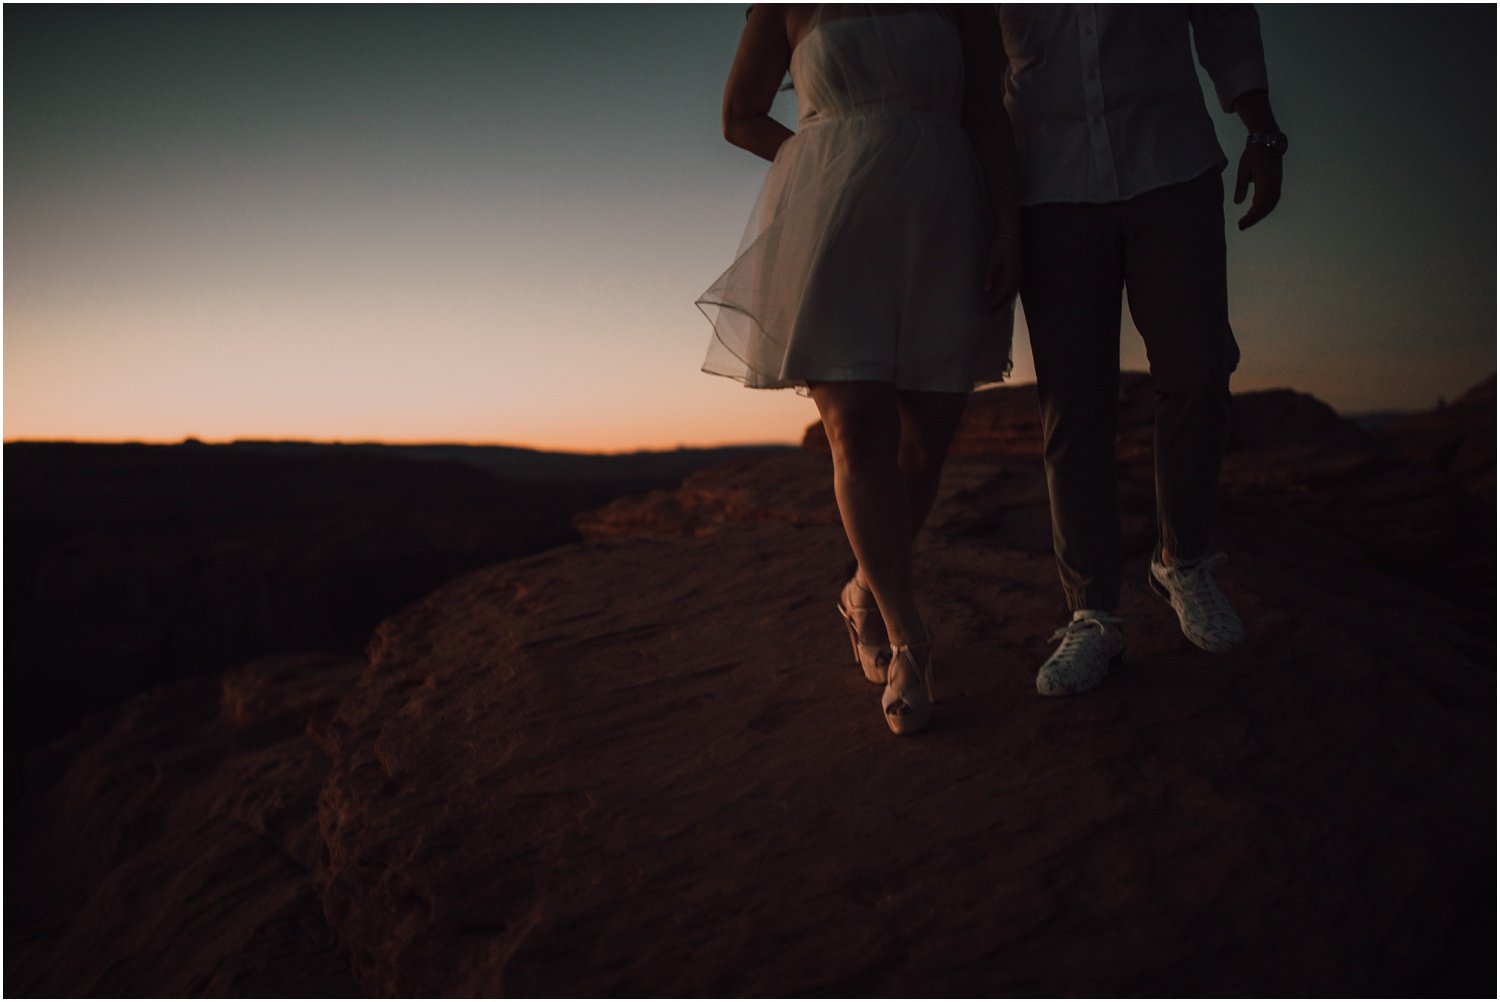 bride and groom eloping at horseshoe bend in arizona, shot by Riss + Steven